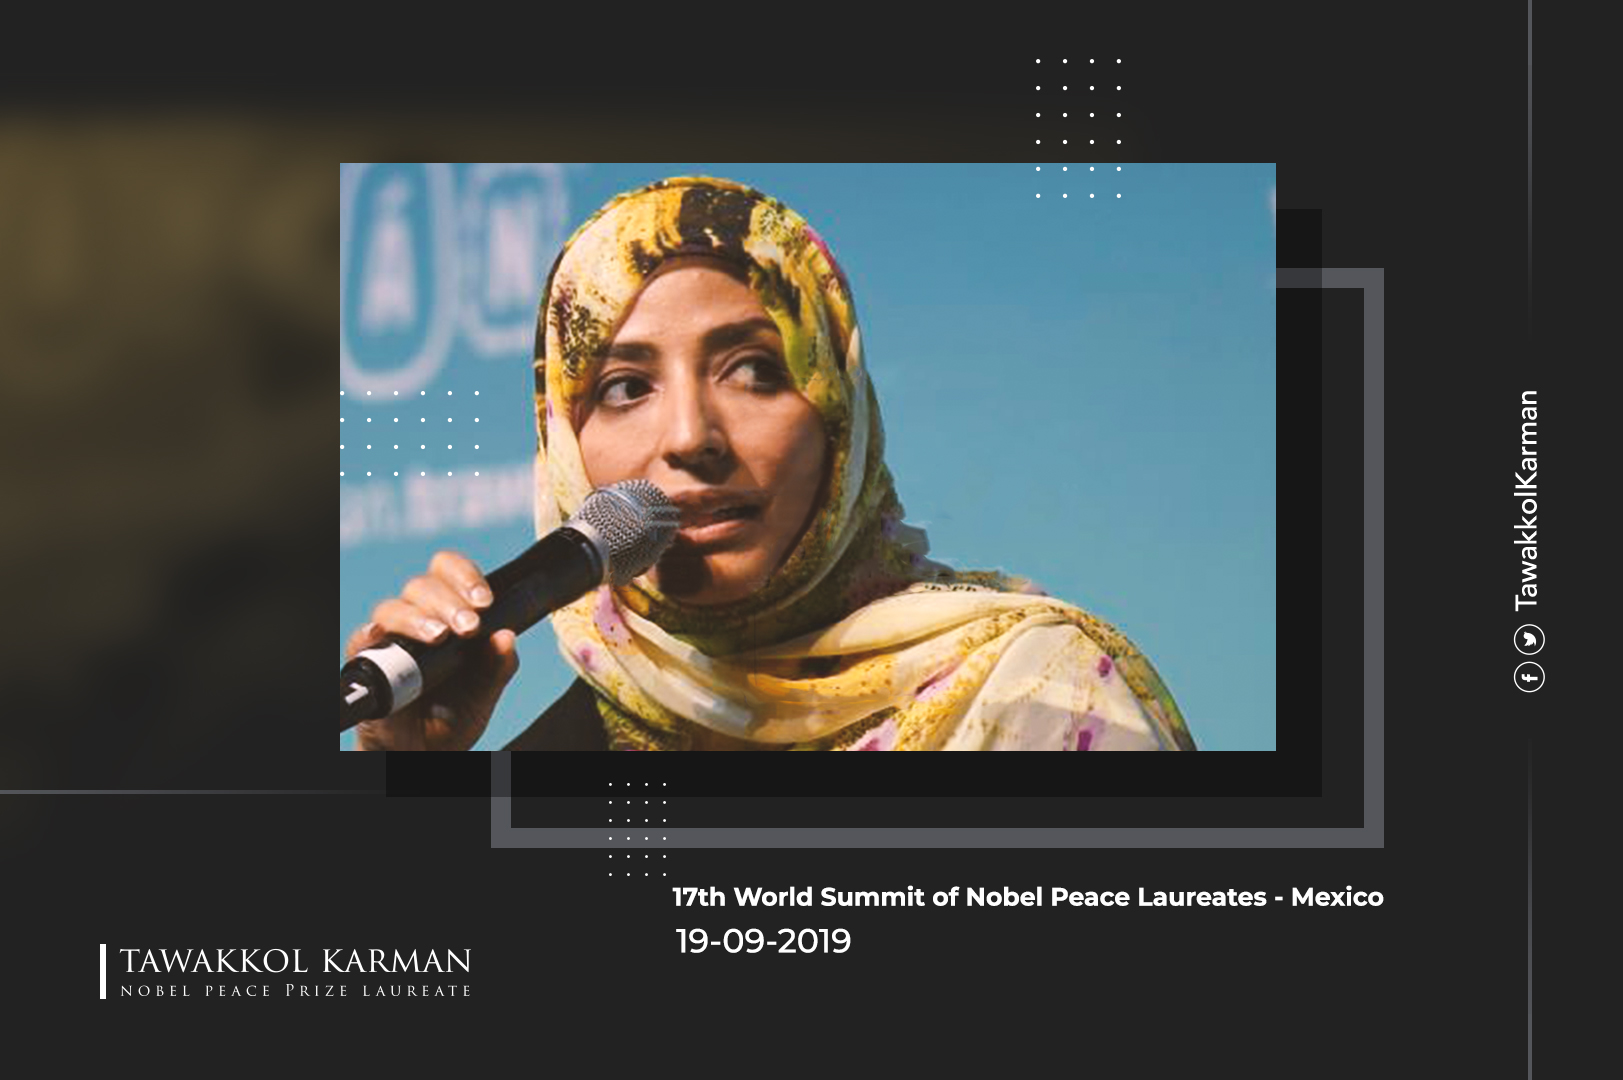 Participation of Tawakkol Karman in the 17th World Summit of Nobel Peace Laureates - Mexico